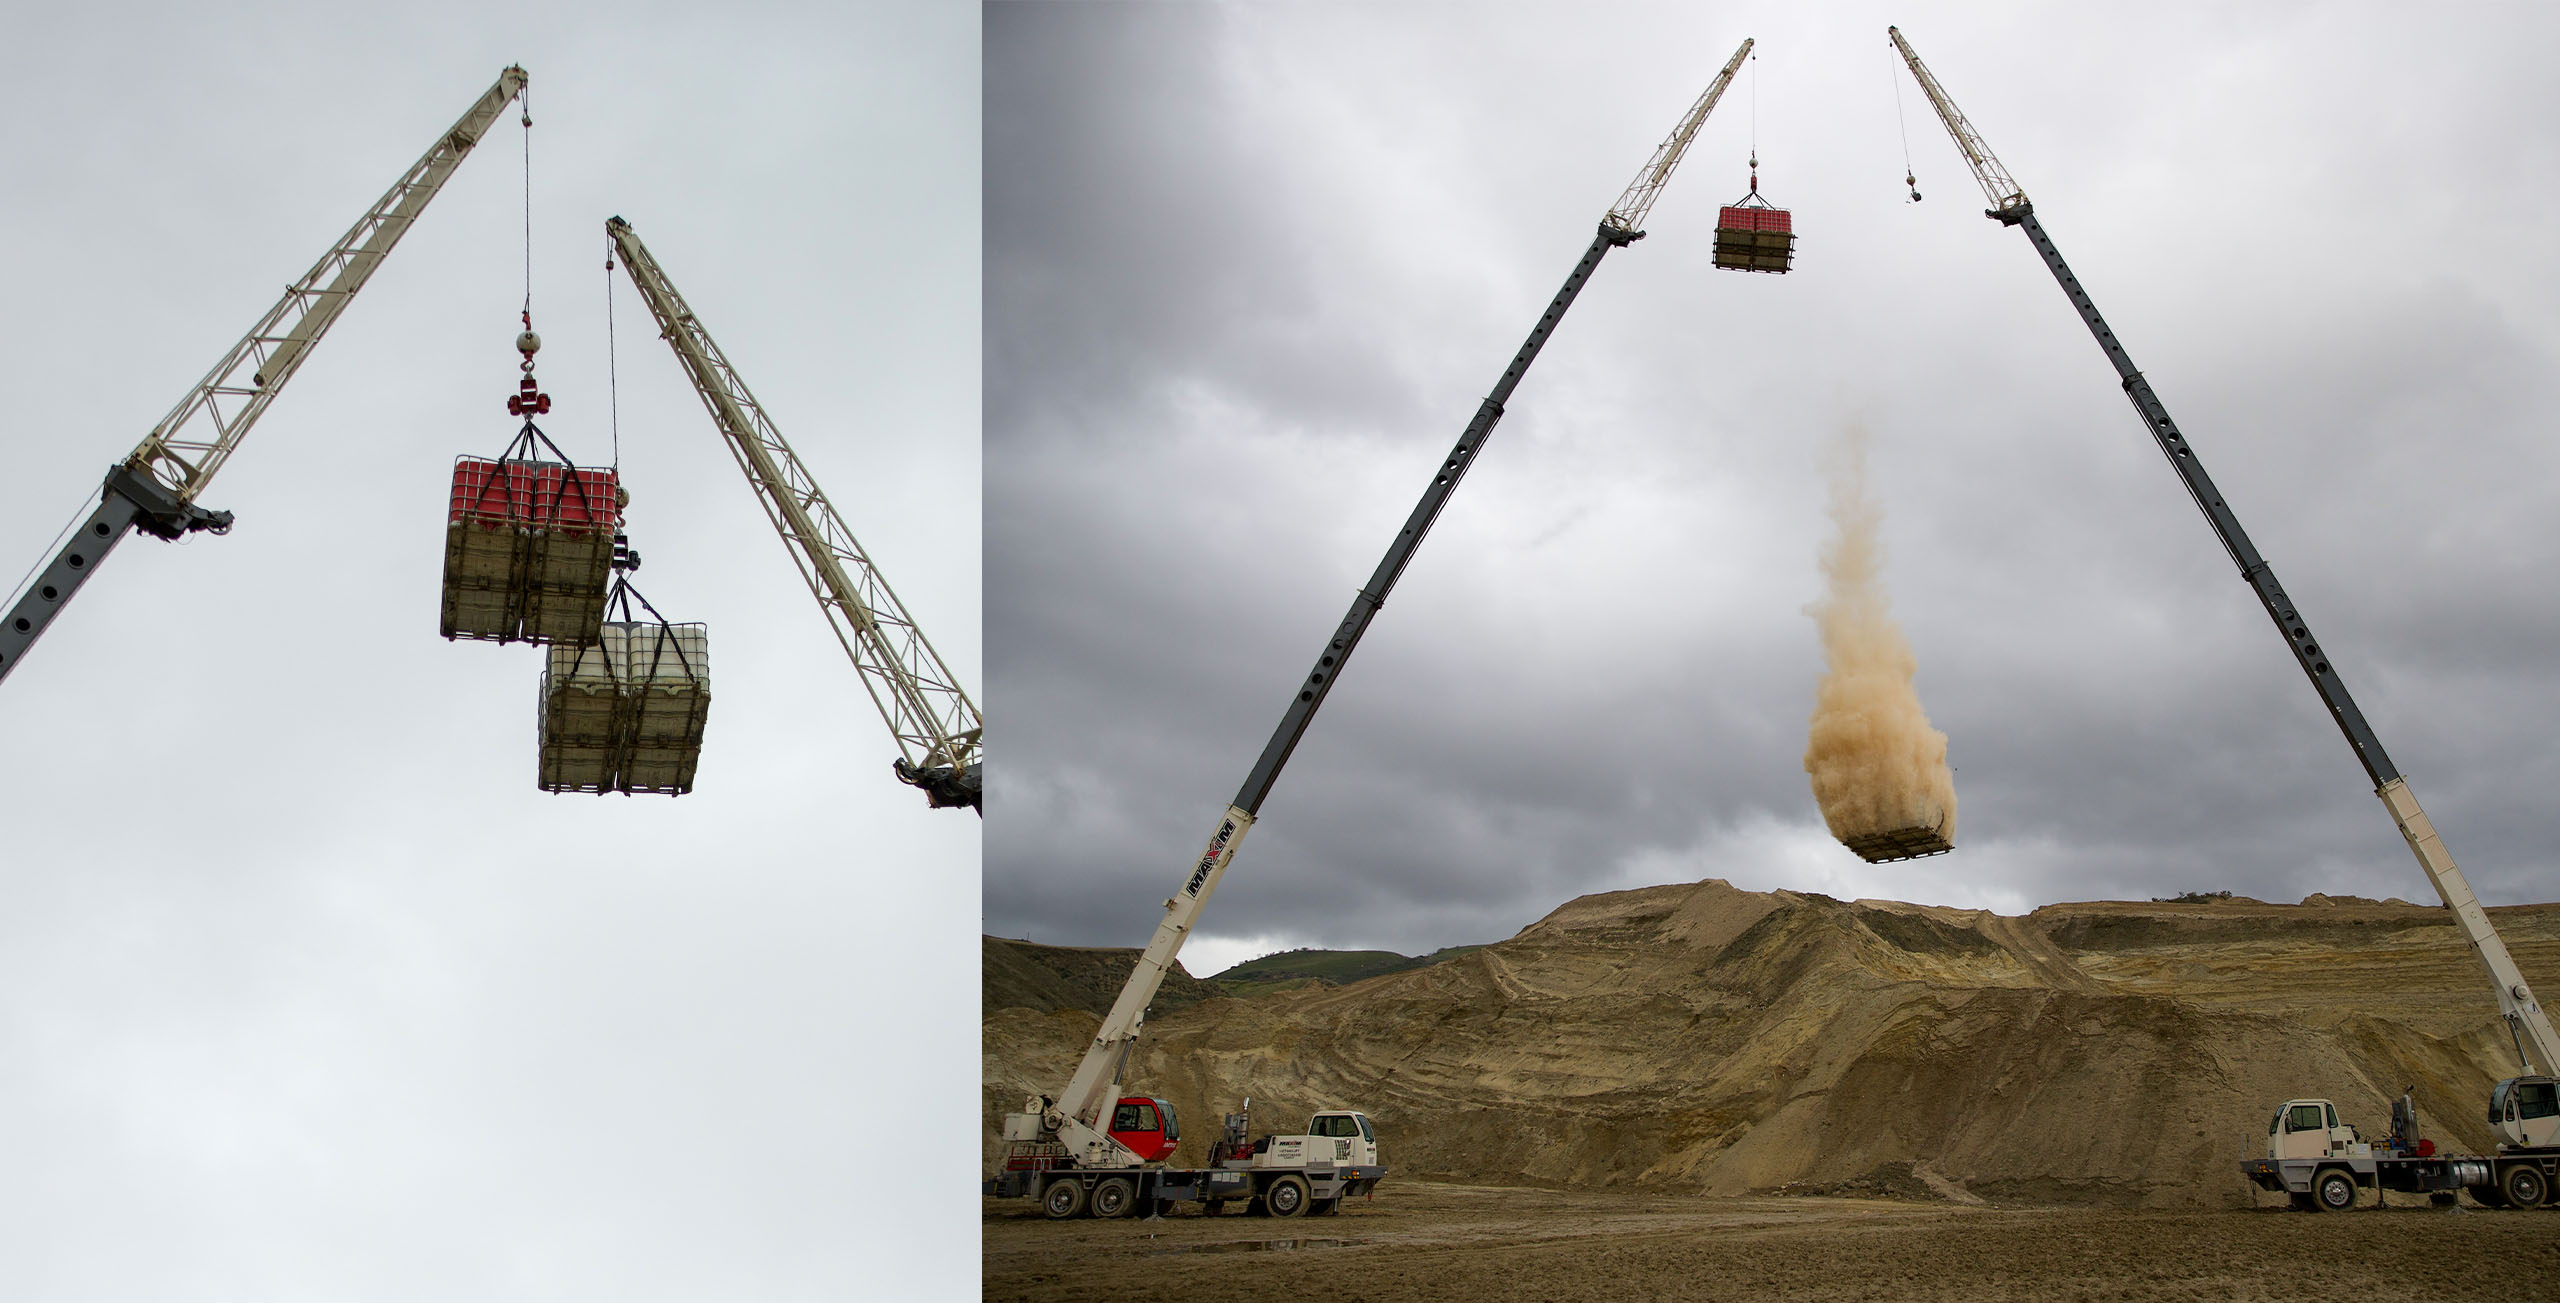 Cranes lifting weights into the air (left). The weight without Loctite applied falls from a tall height (right).